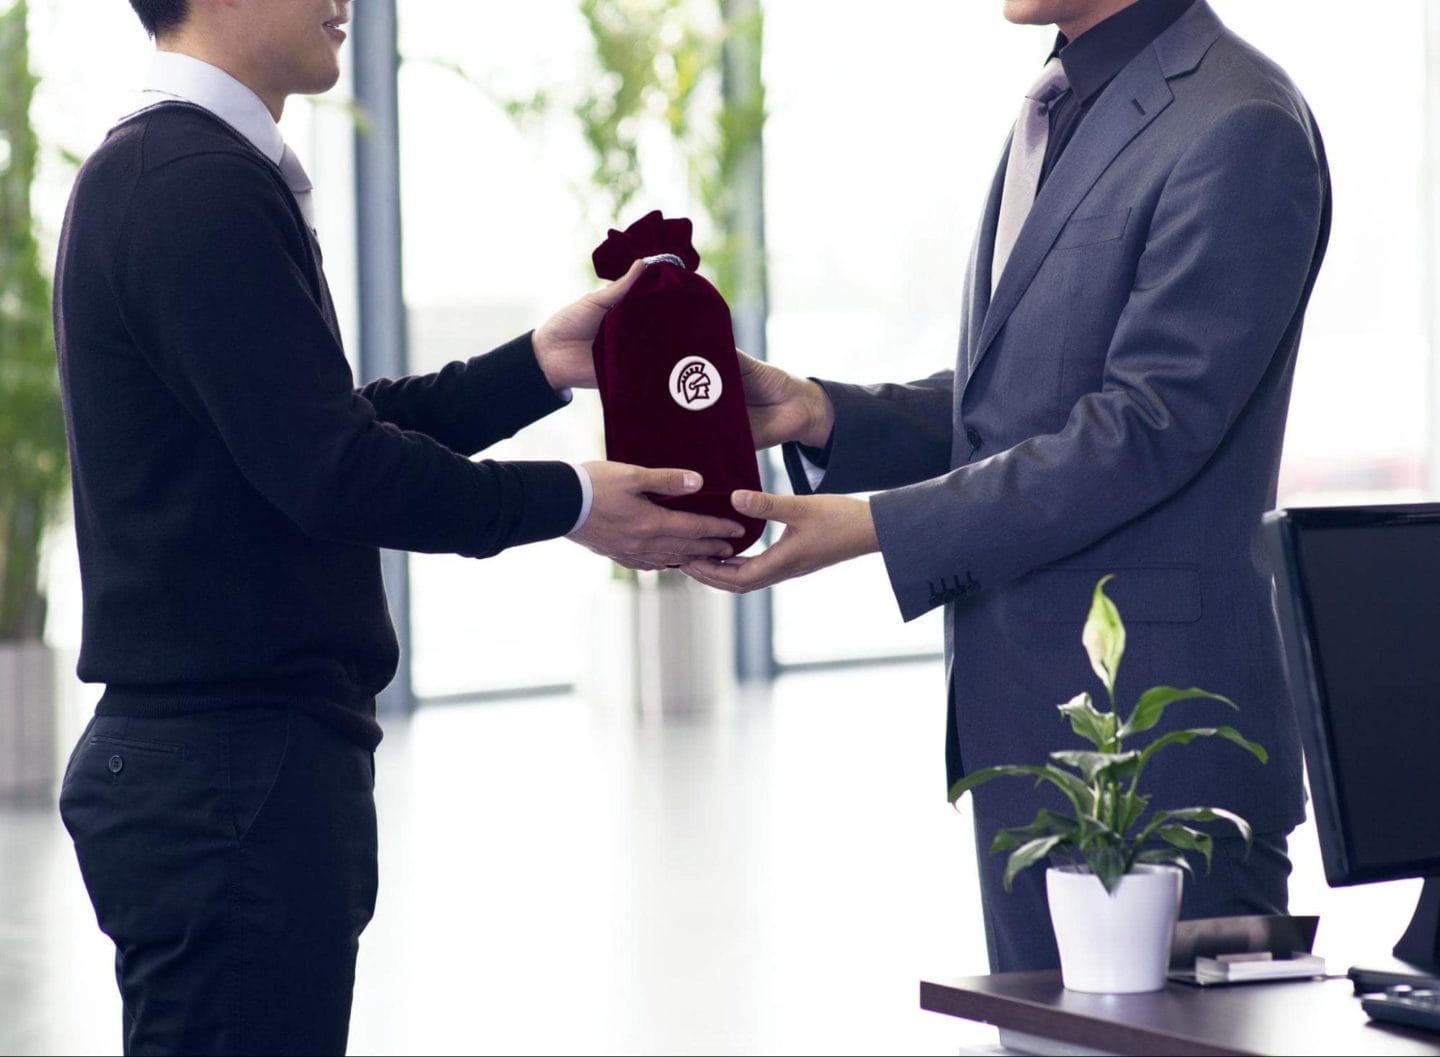 Two business men in an office. One is handing the other a gifted bottle of wine.